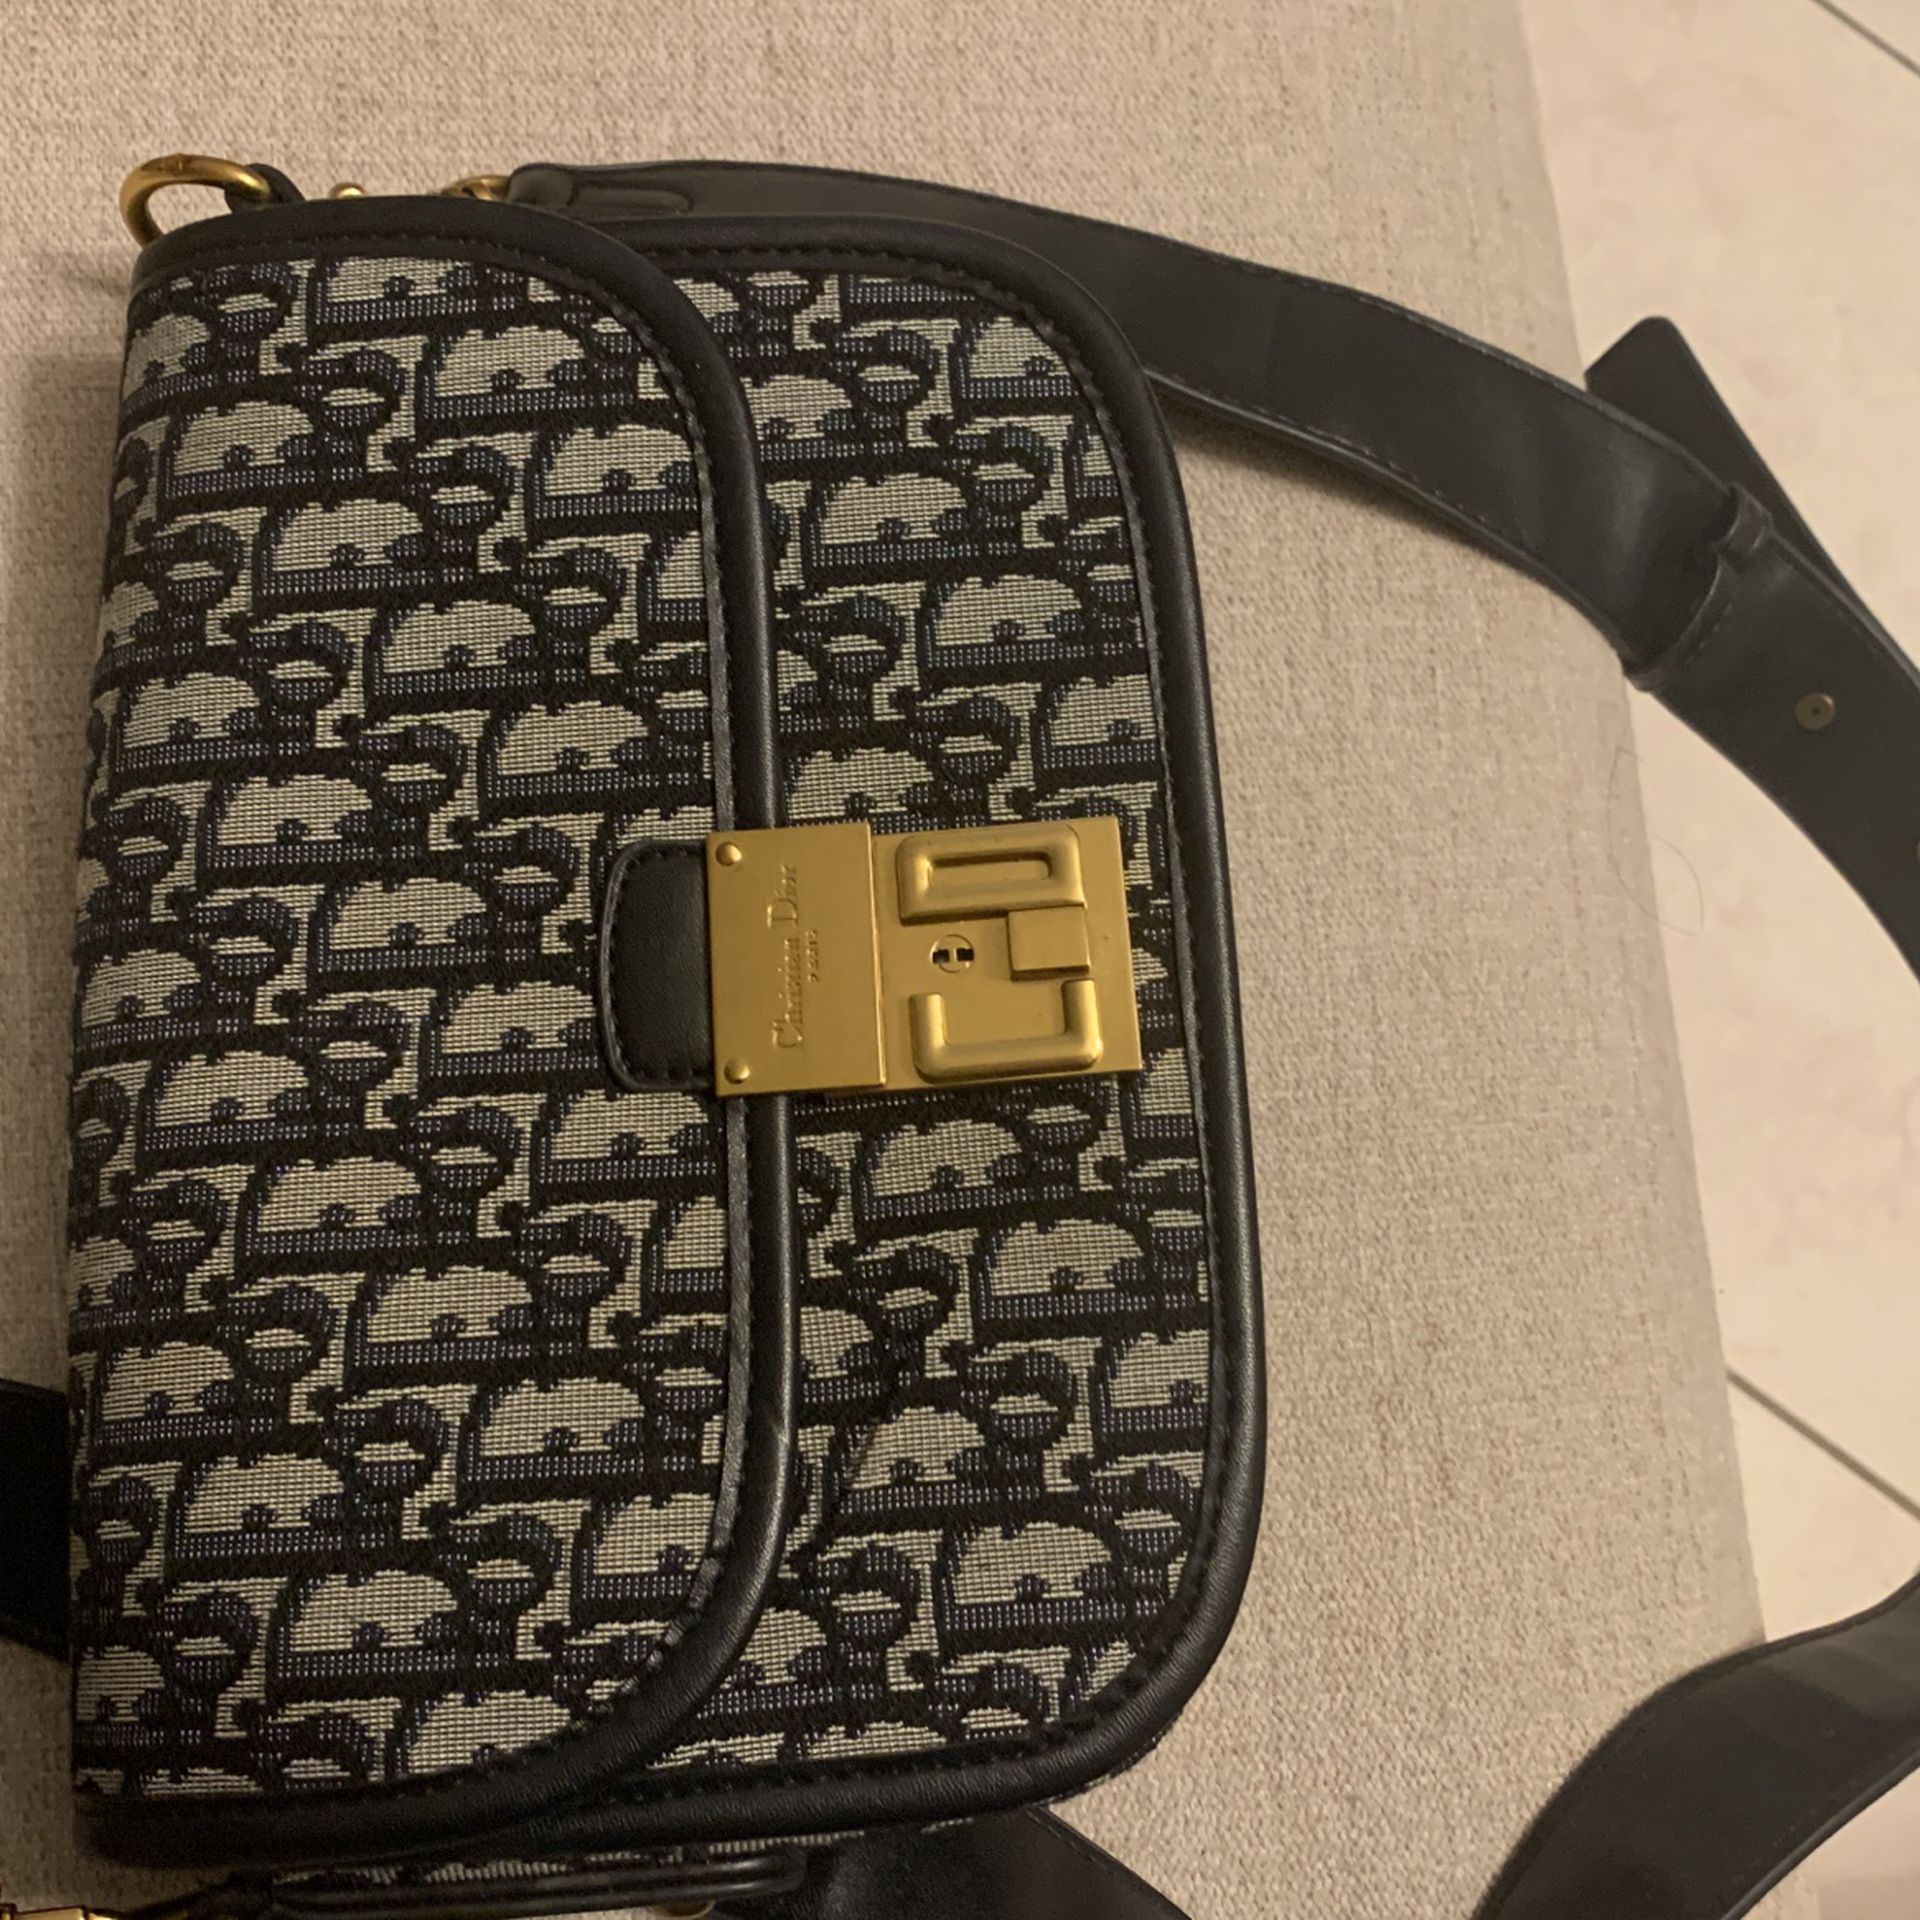 Authentic Mini Lady Dior GHW for Sale in Corona, CA - OfferUp